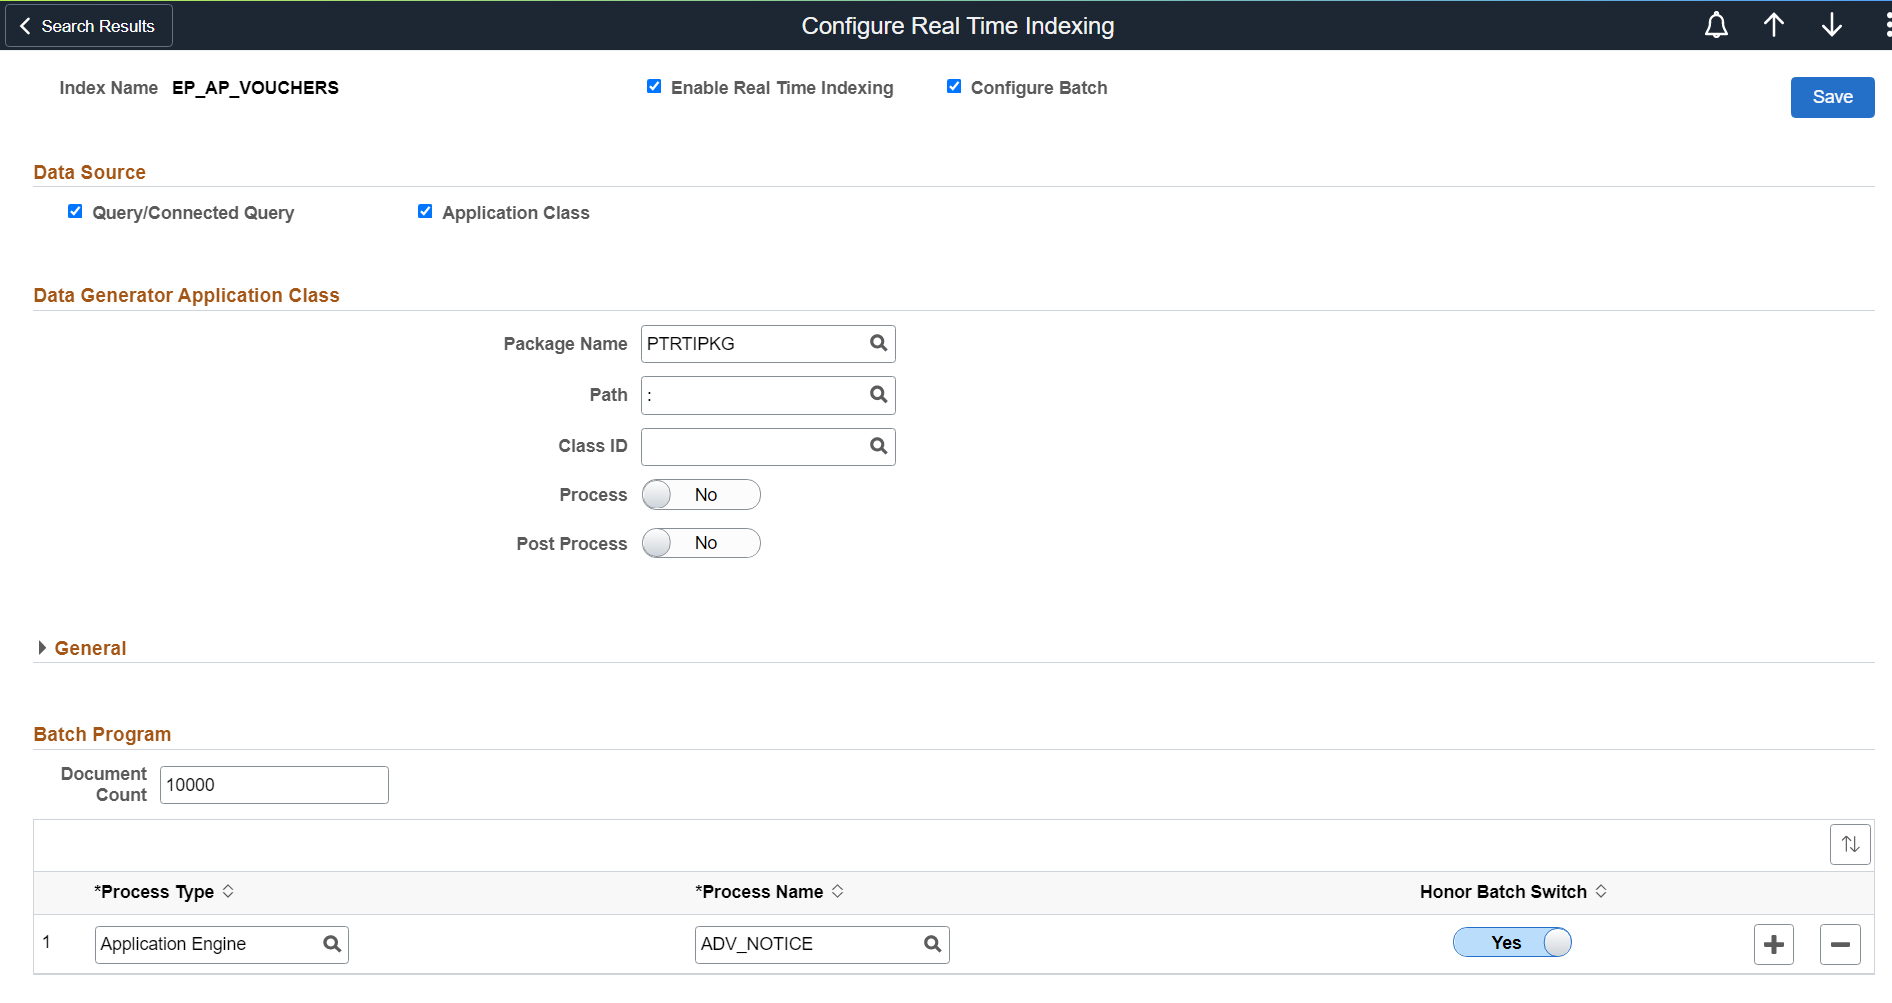 Configure Real Time Indexing with Configure Batch